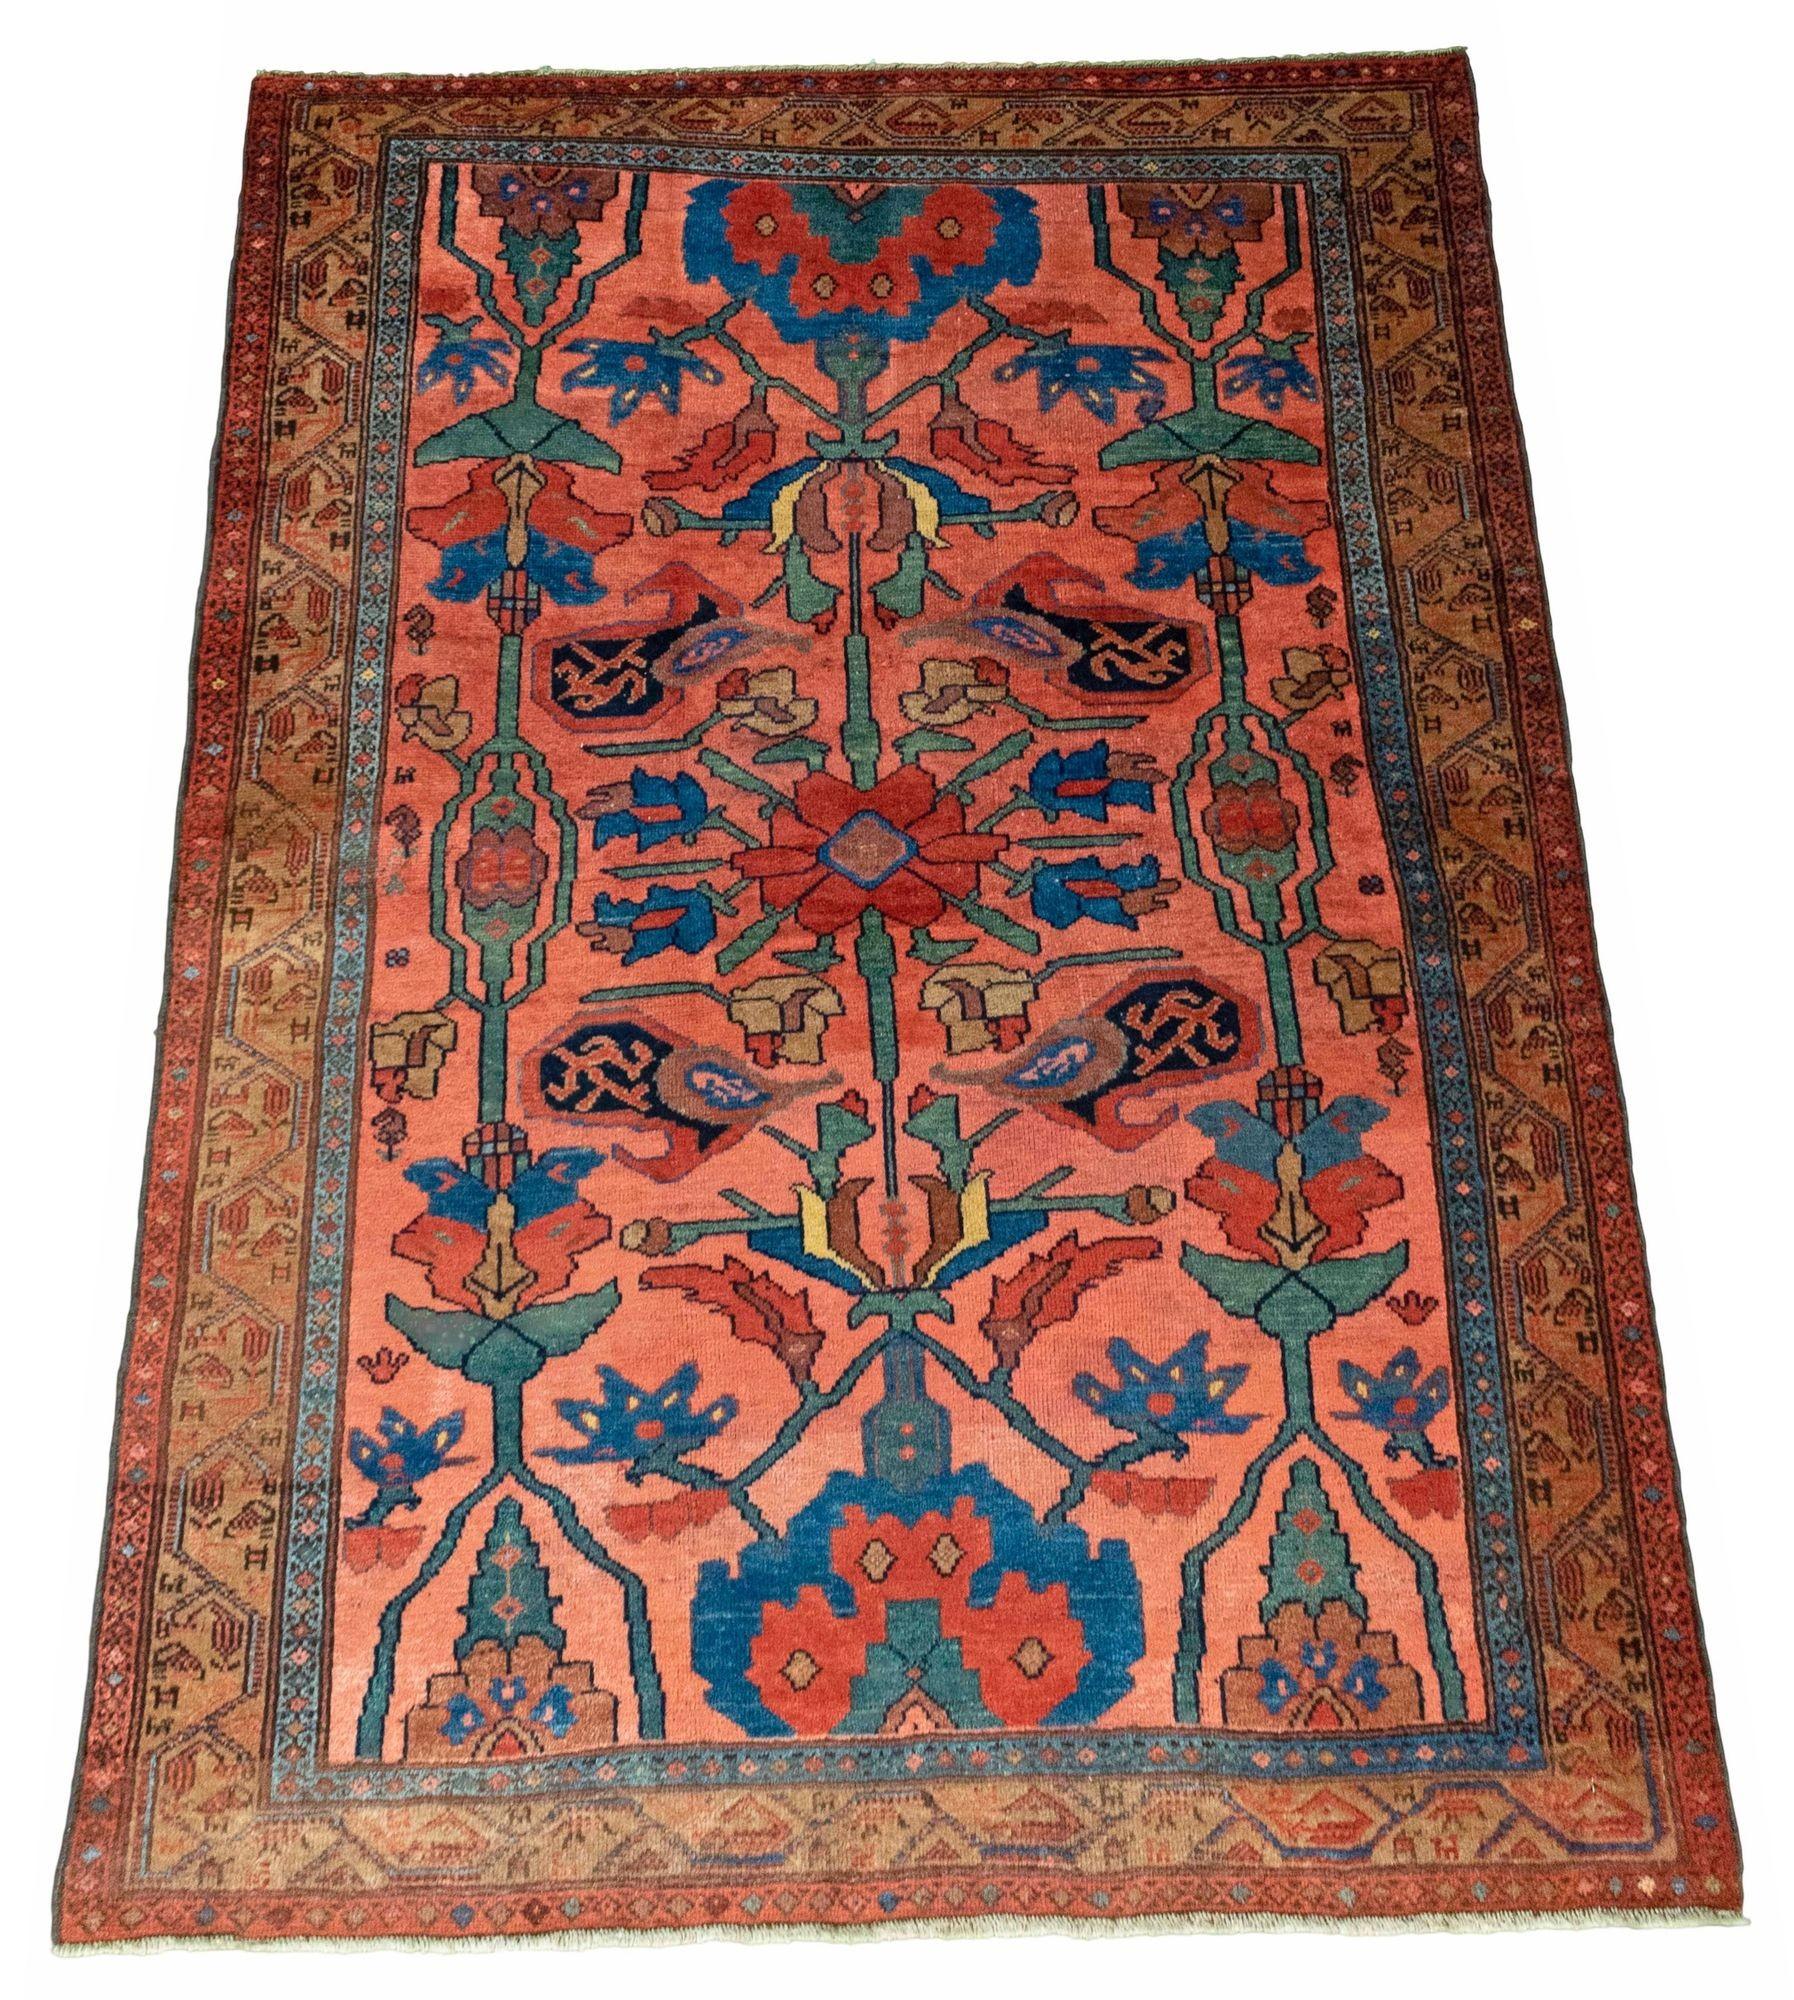 A beautiful antique Hamadan rug, hand woven circa 1920 with an unusual floral design on a pinky red field and camel border. Wonderful secondary colours including a lovely teal in the field and a highly decorative rug. Note the small animal figures